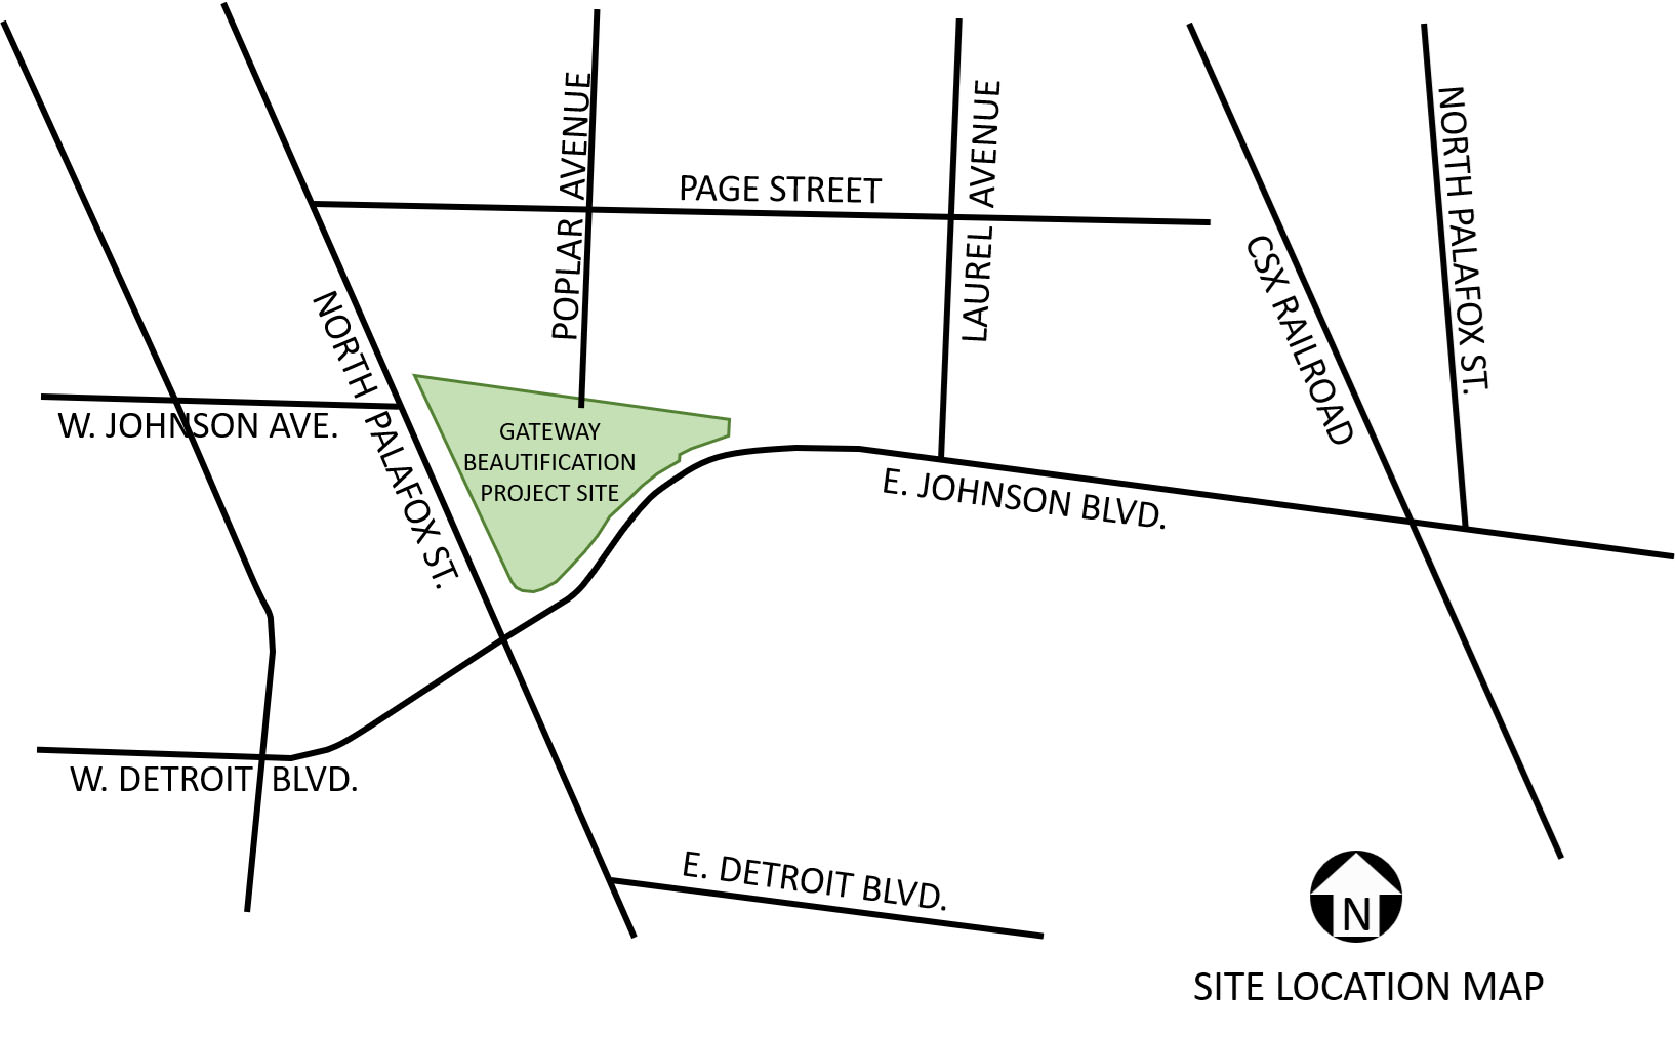 Site location map